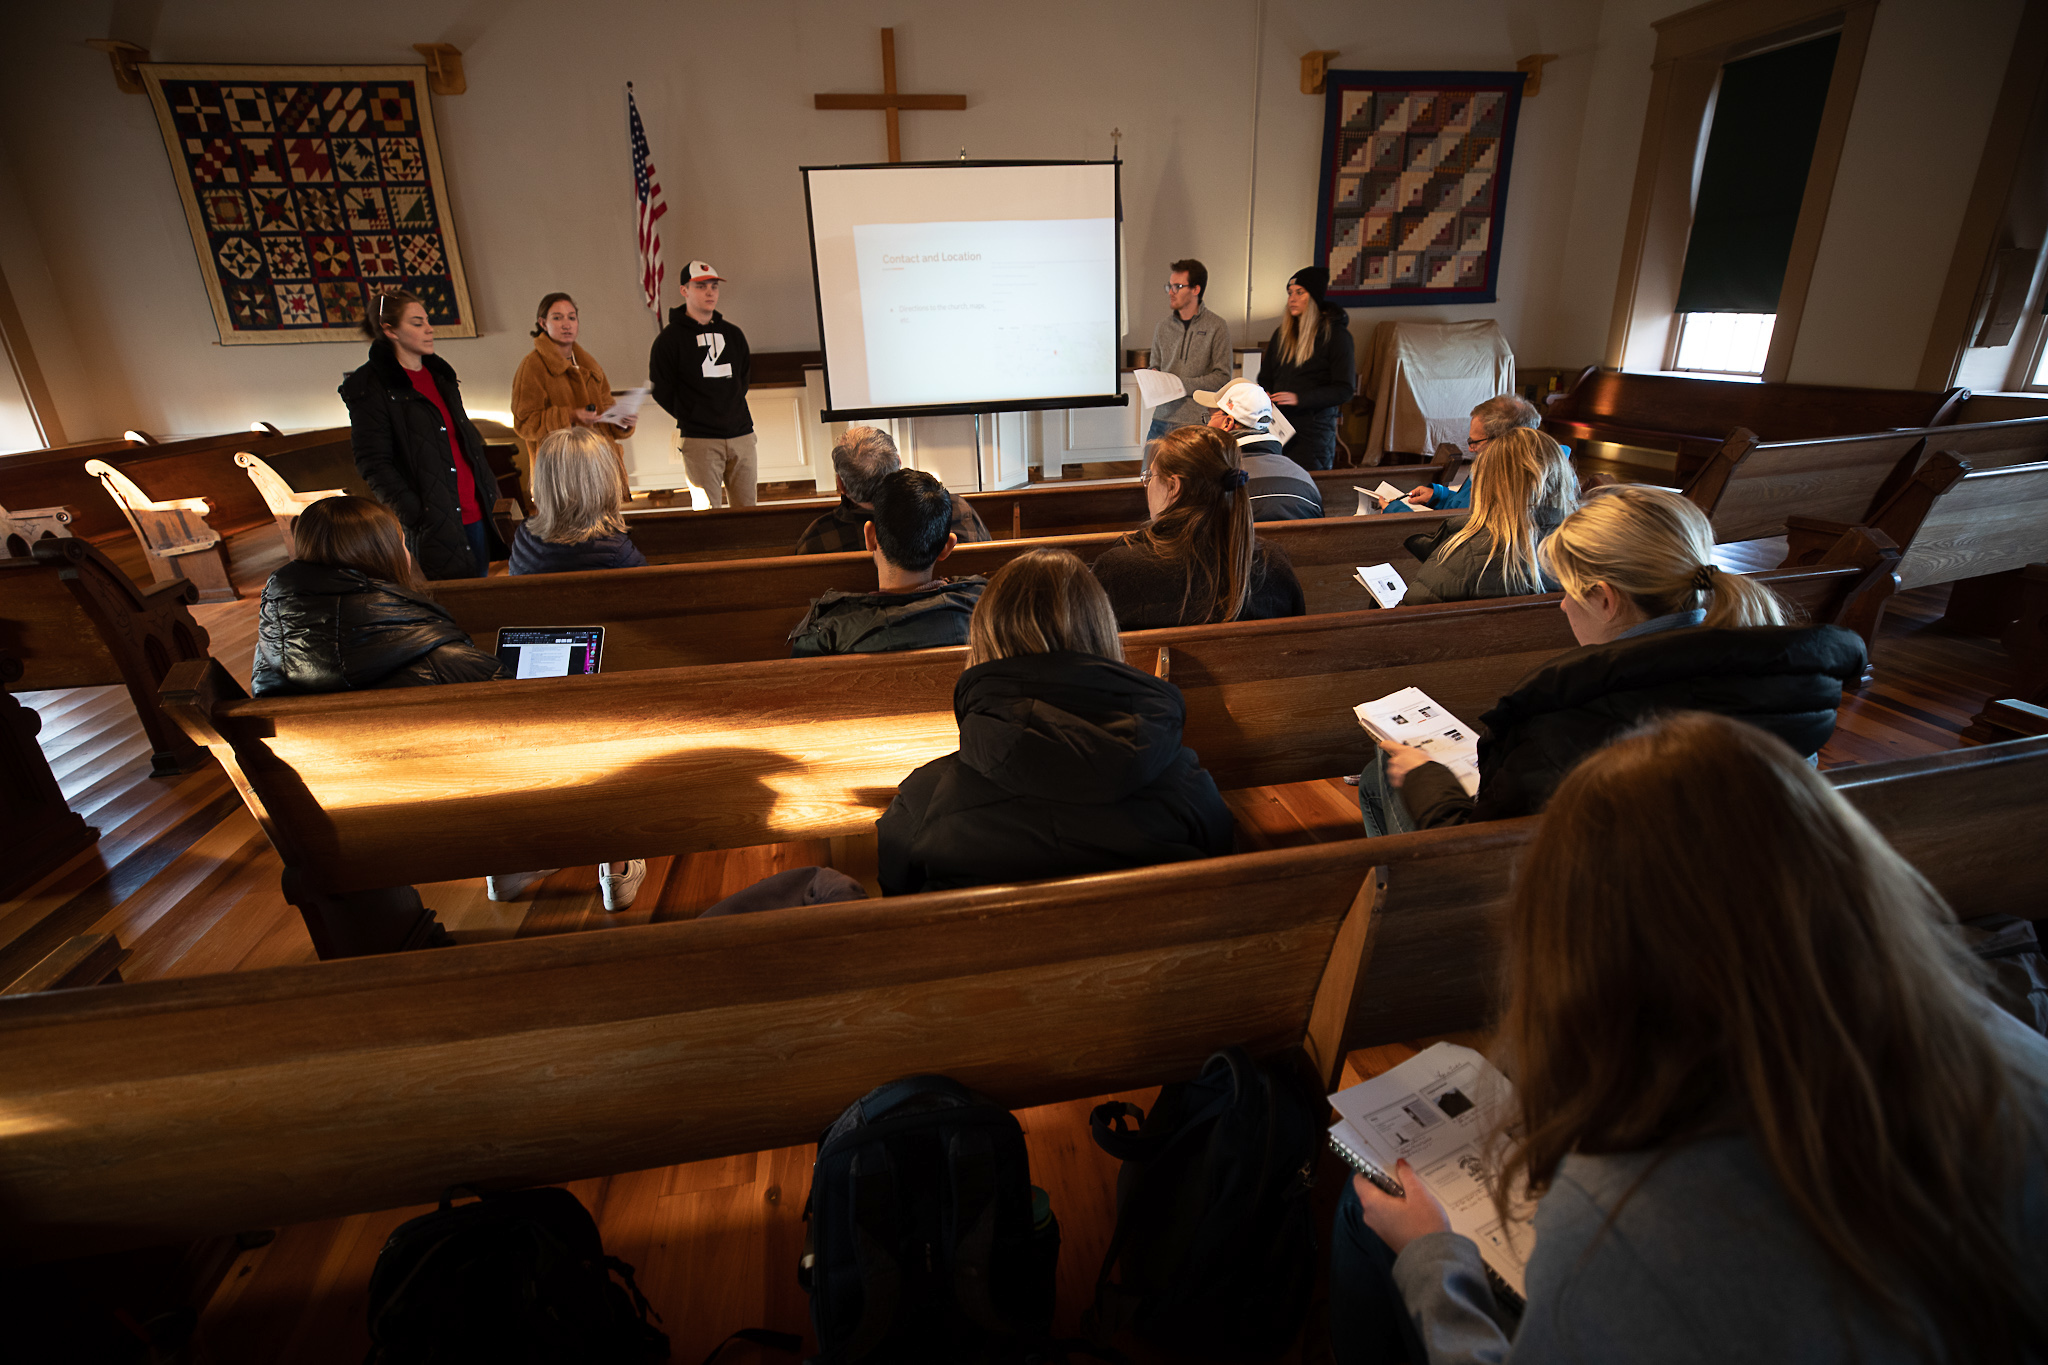 Miami students present ideas to HHC trustees inside the church sanctuary.